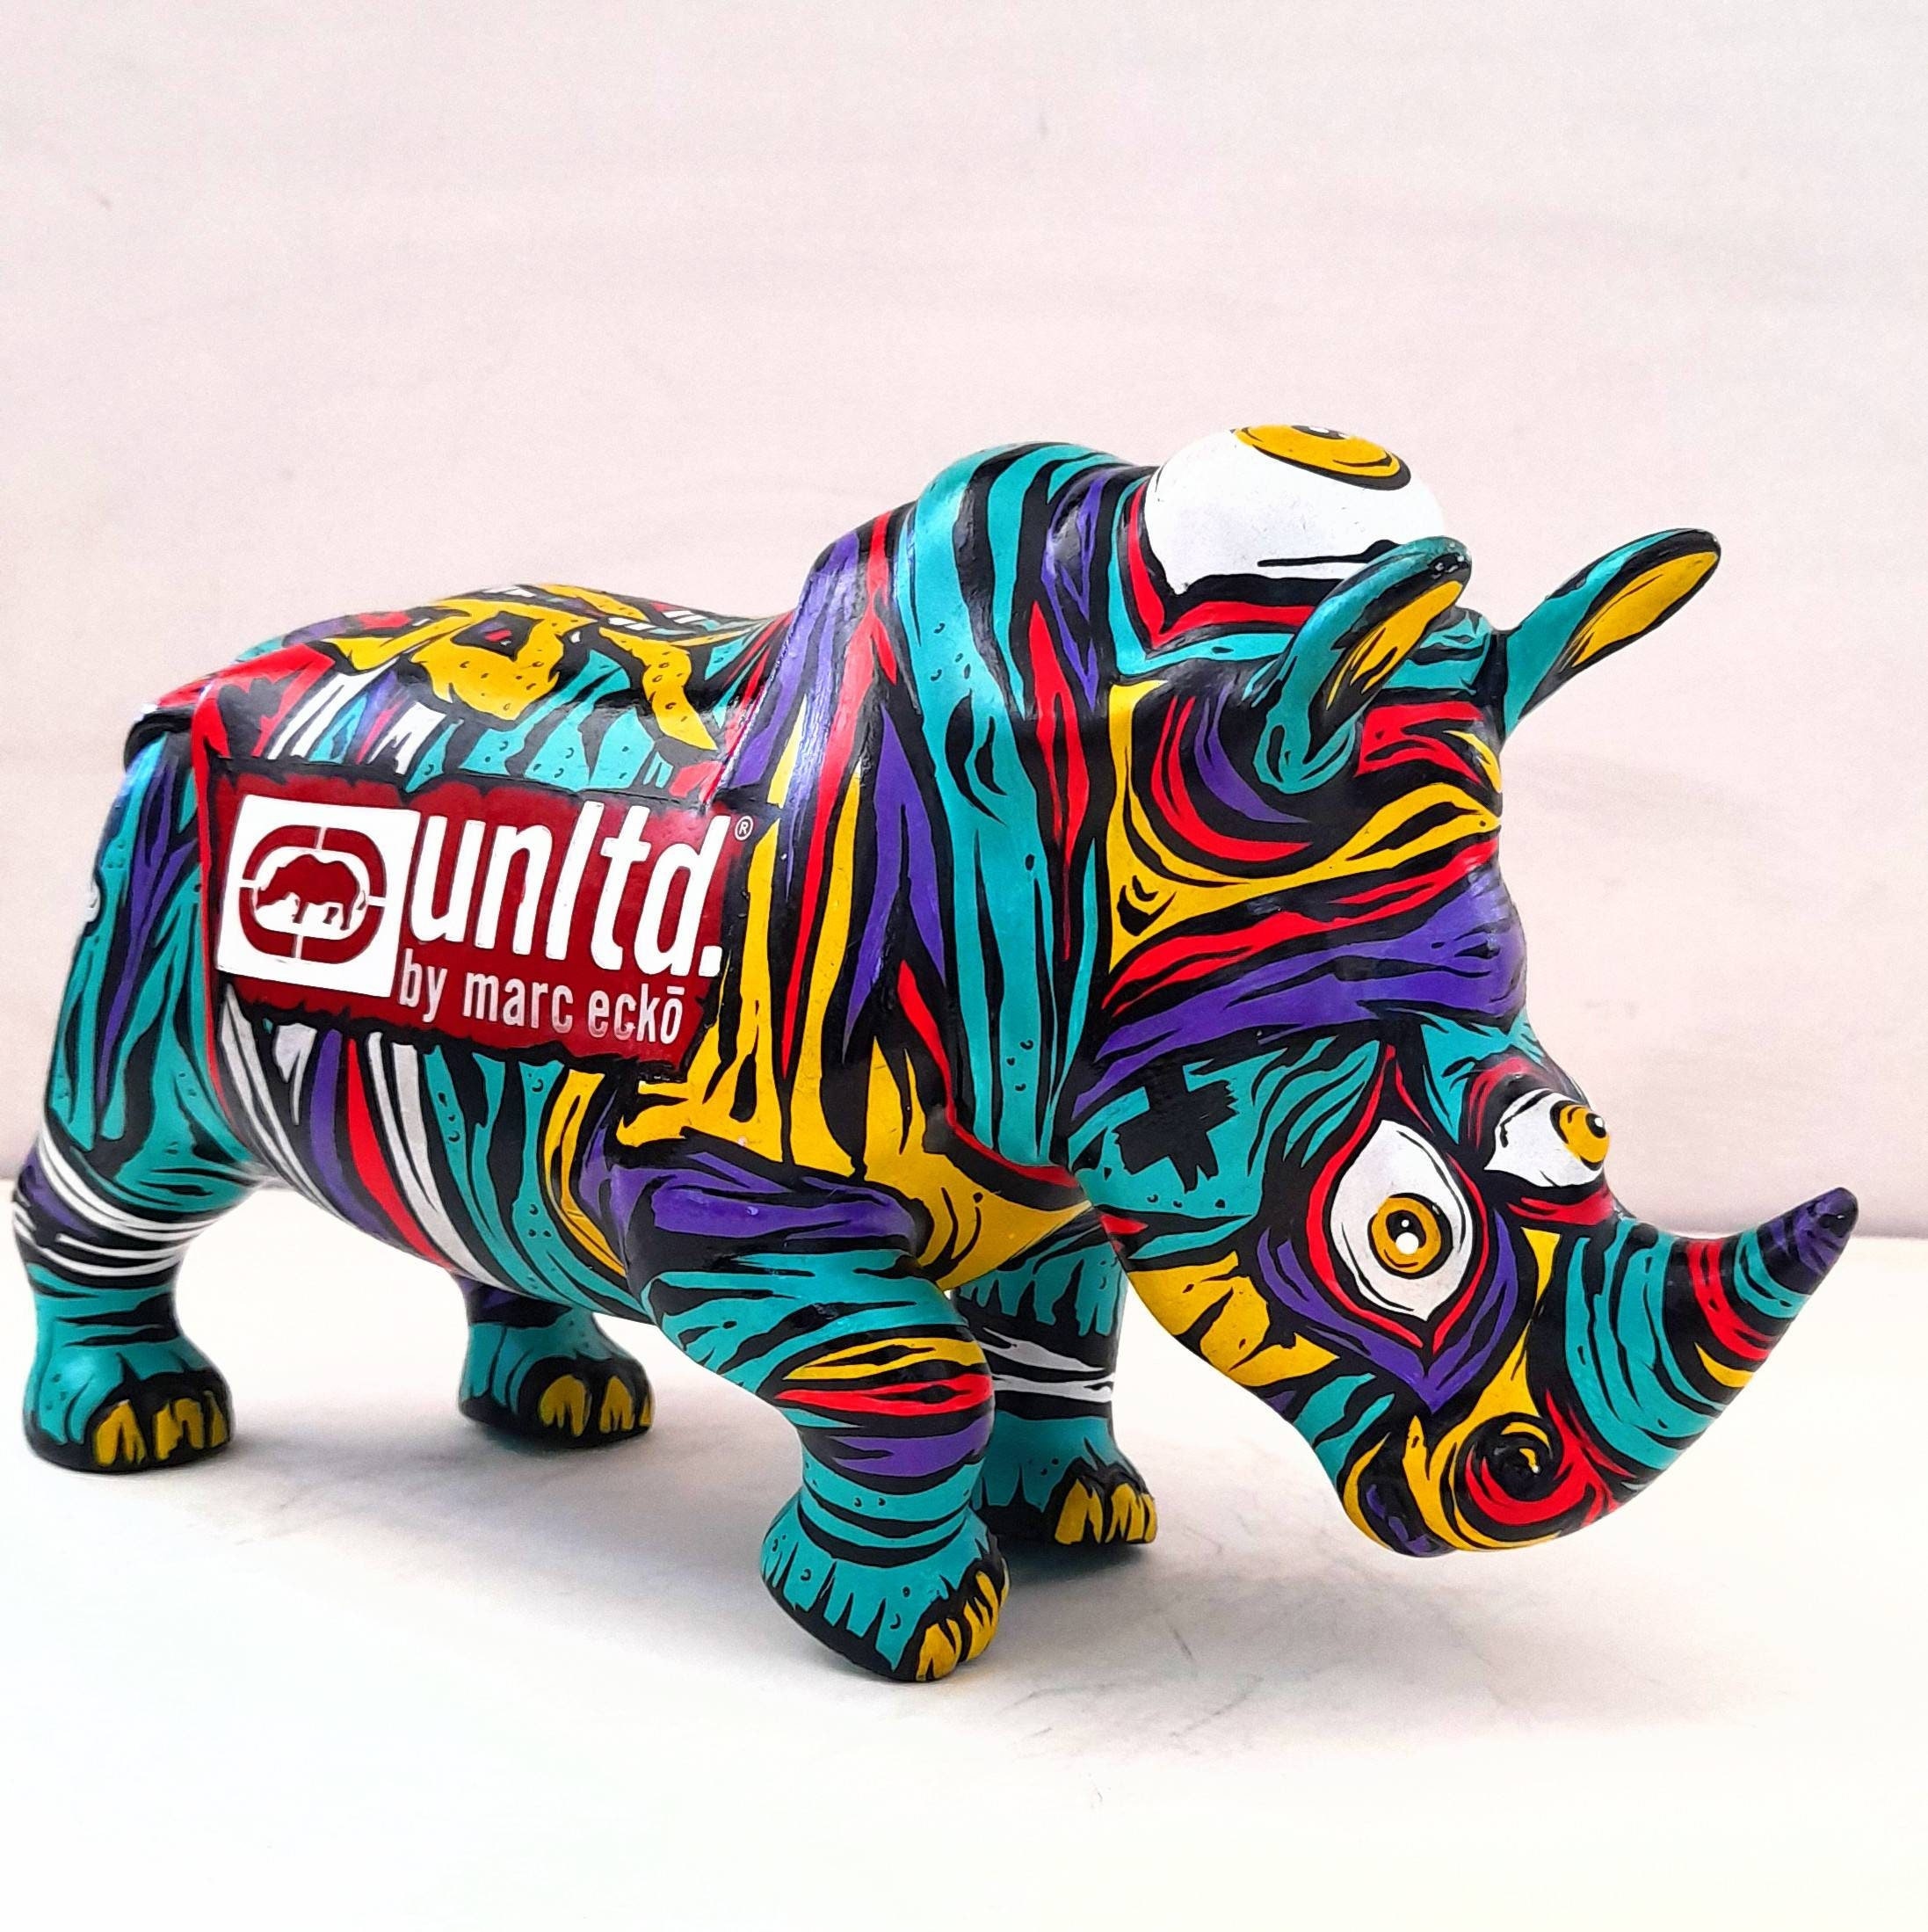 Original Rhino x Marc Ecko Unltd Art Toy - Custom Painted Psychedelic Pop  Art - Collectible Figure - Eckō Unlimited Doll - One of a kind!